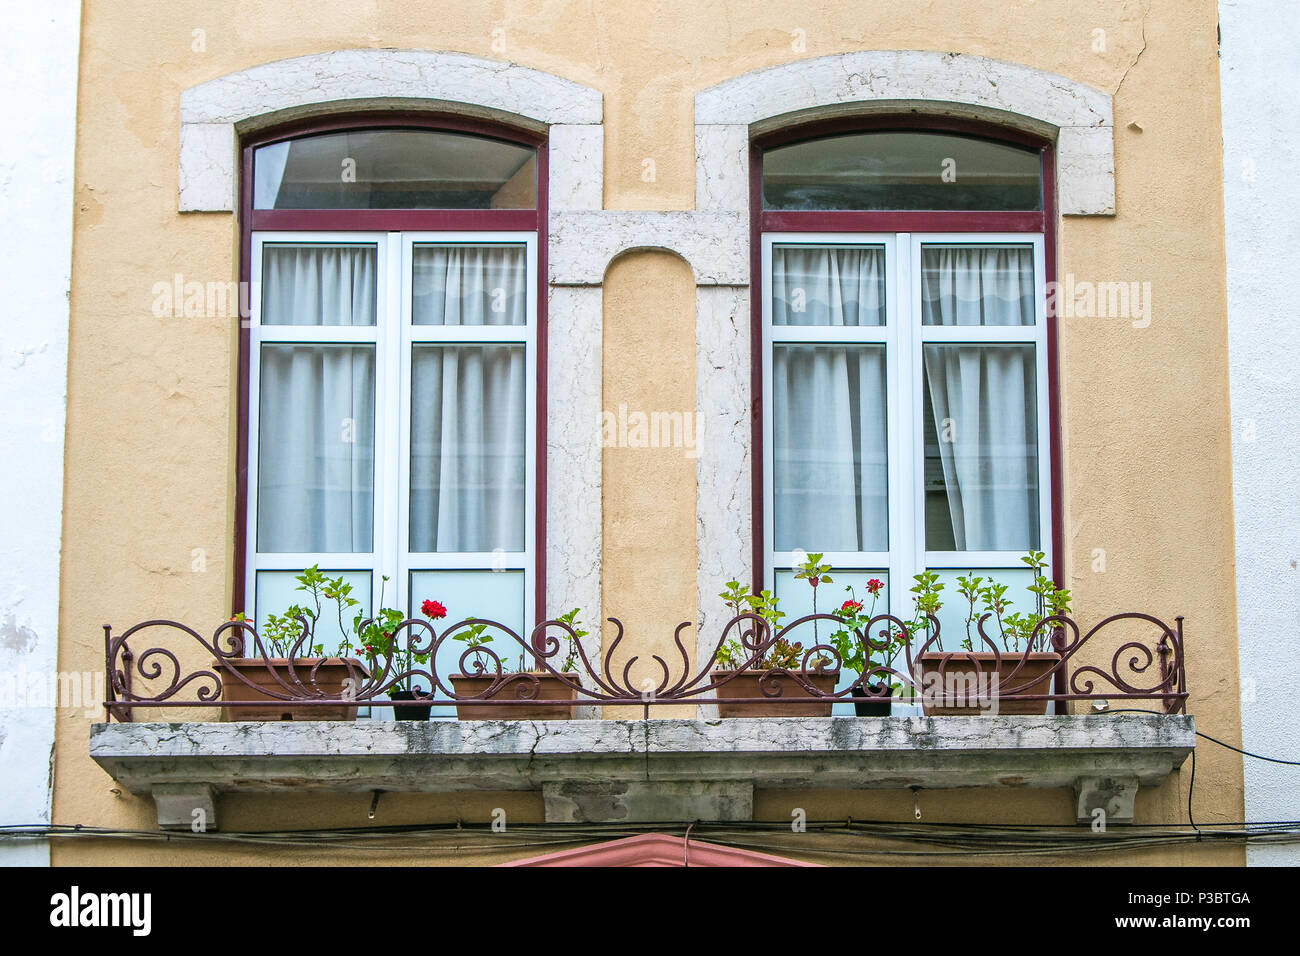 Paired arched windows with a balcony housing flower pots. European architecture. Stock Photo